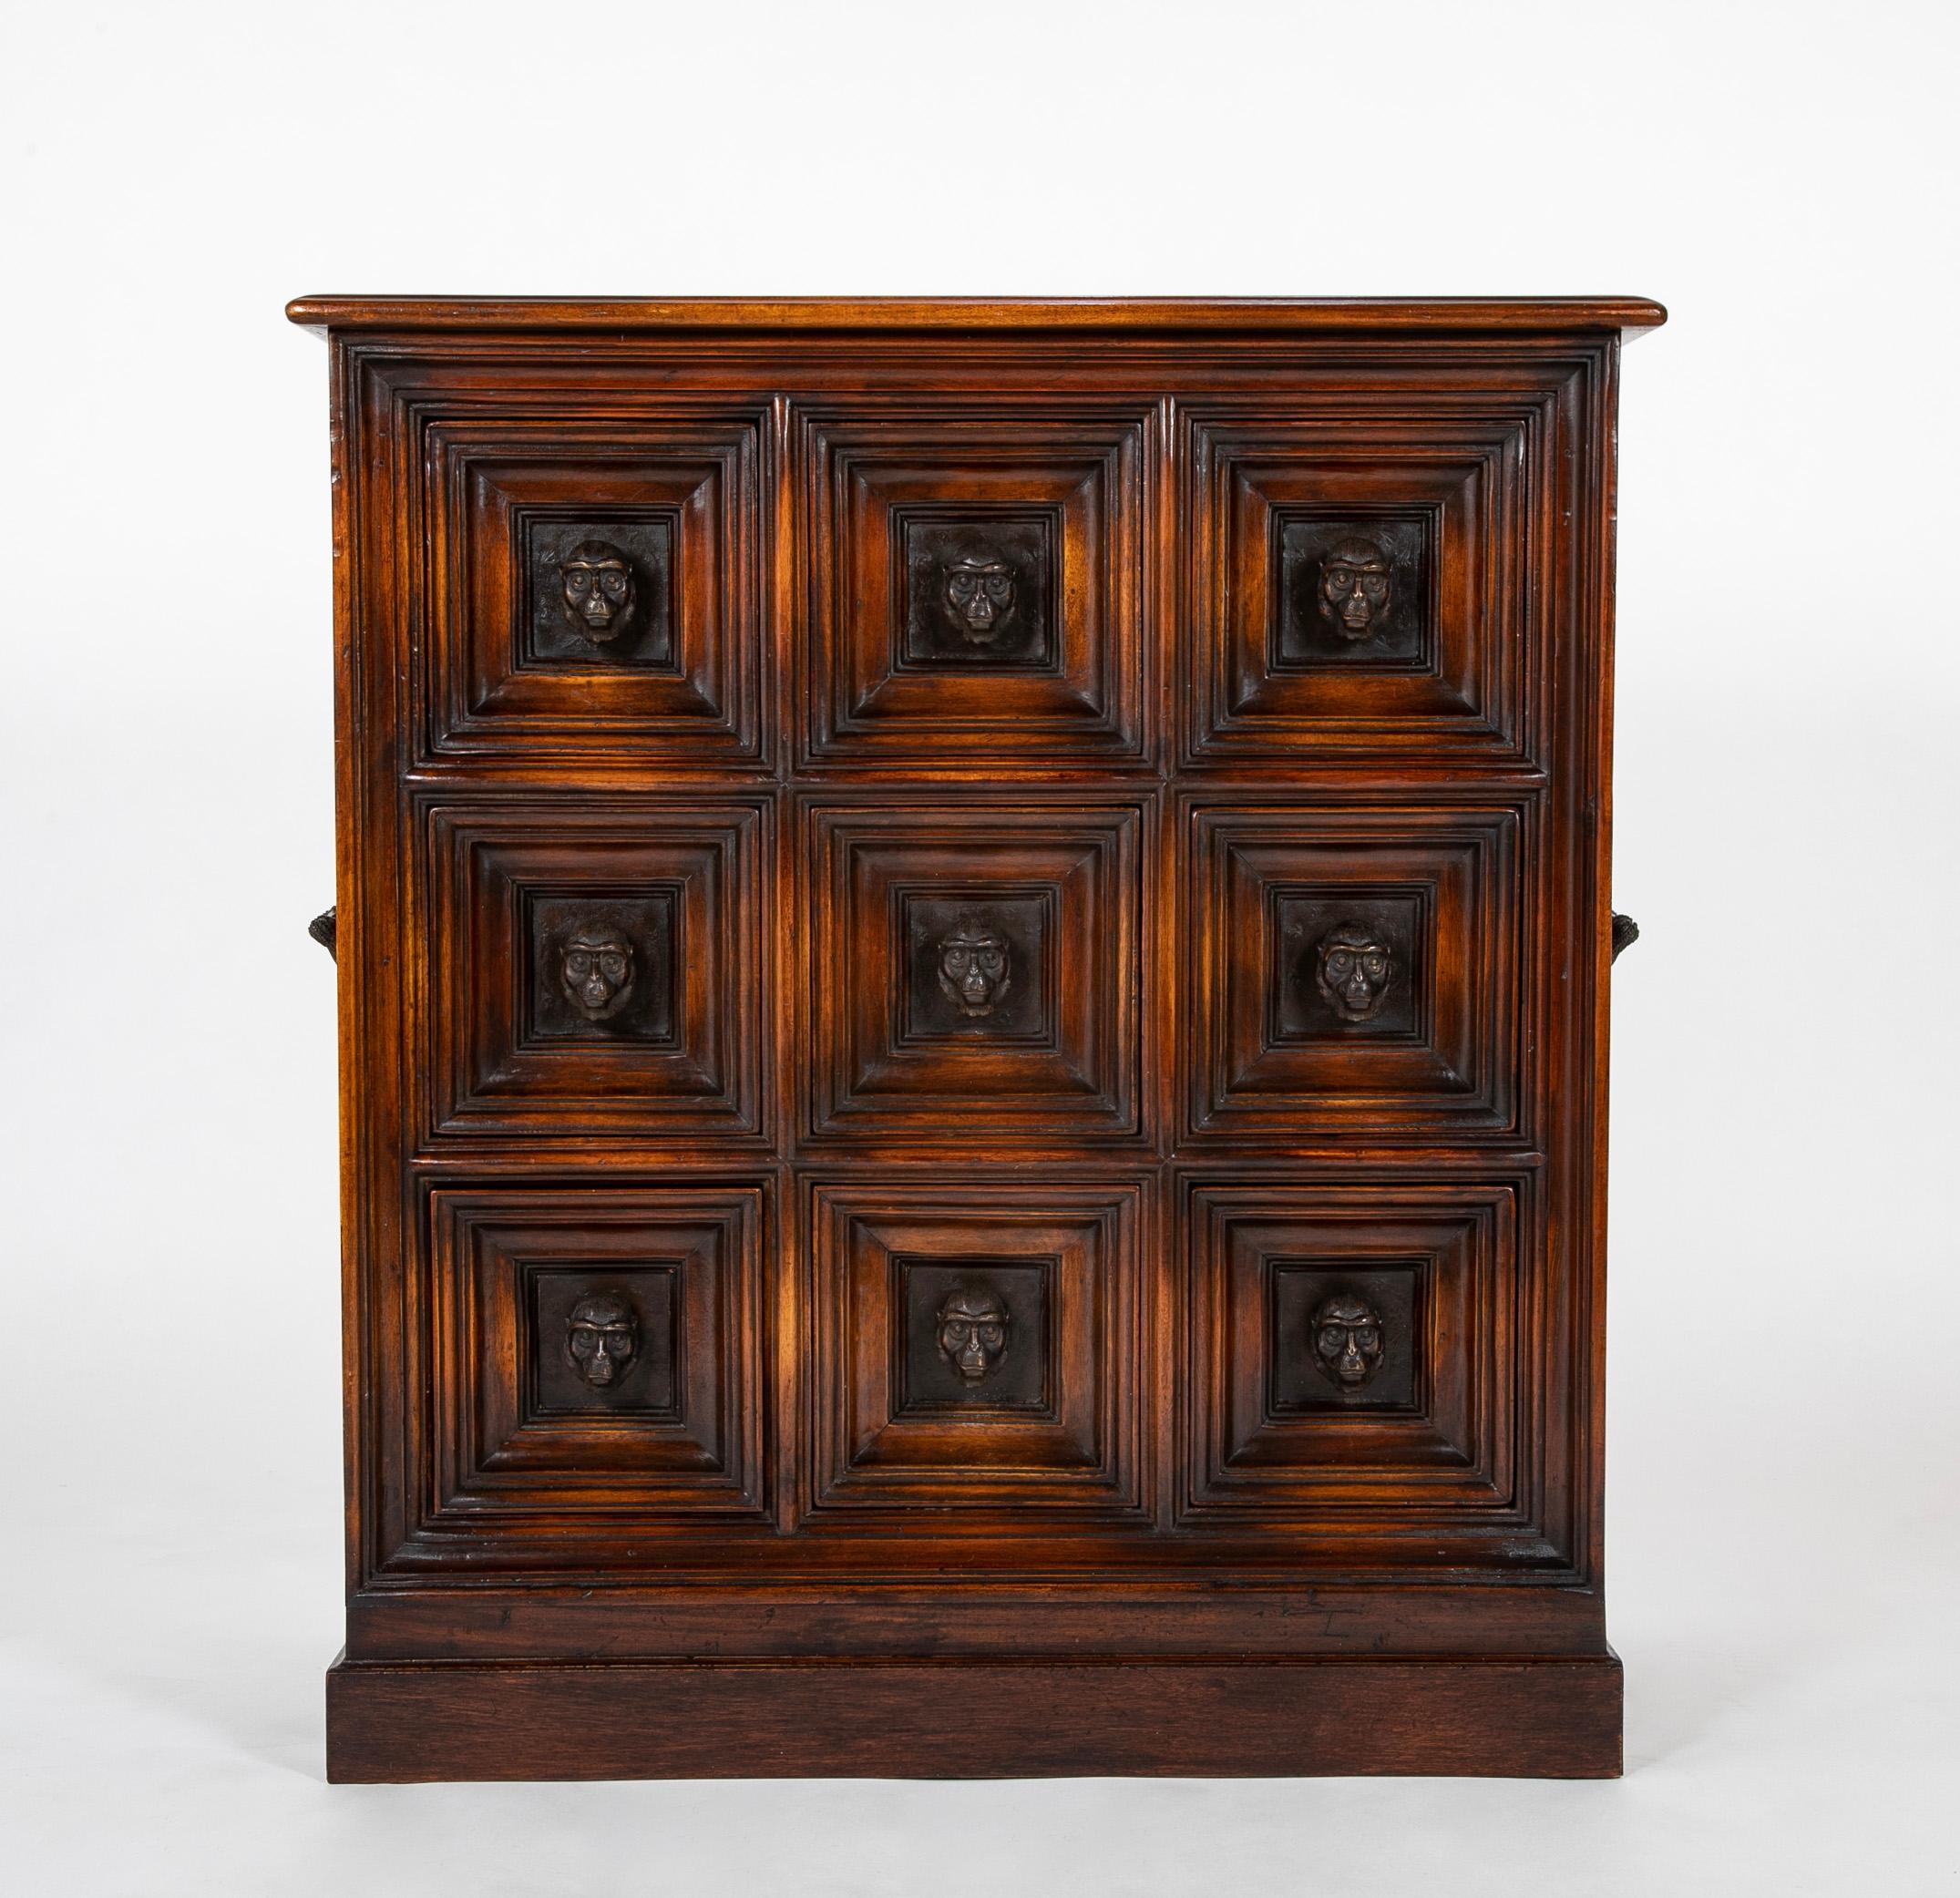 An amusing leather panel chest on stand, with nine bronze monkey head handled drawers, by Theodore Alexander, after the original 19th century Italian. This is a real conversation piece, amusing, whimsical, and also a beautifully made solid credenza